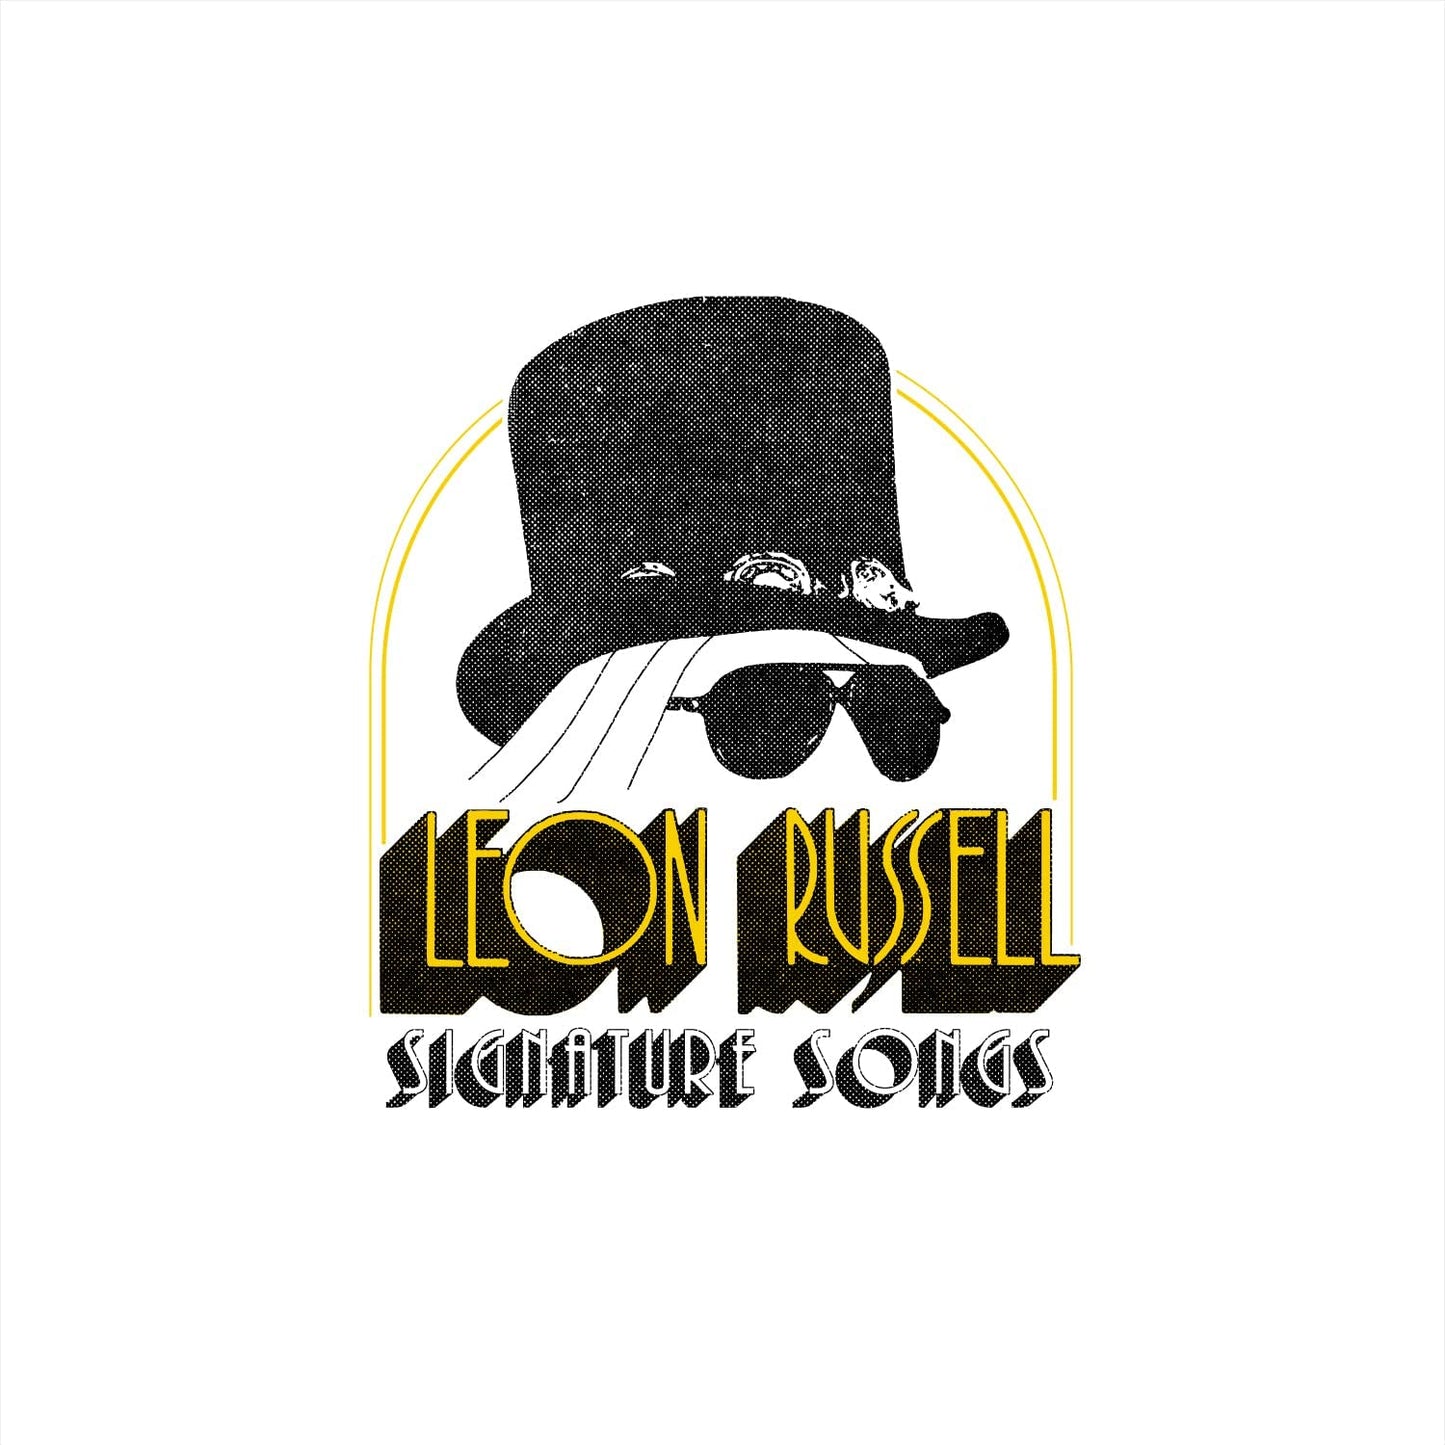 Leon Russell Signature Songs